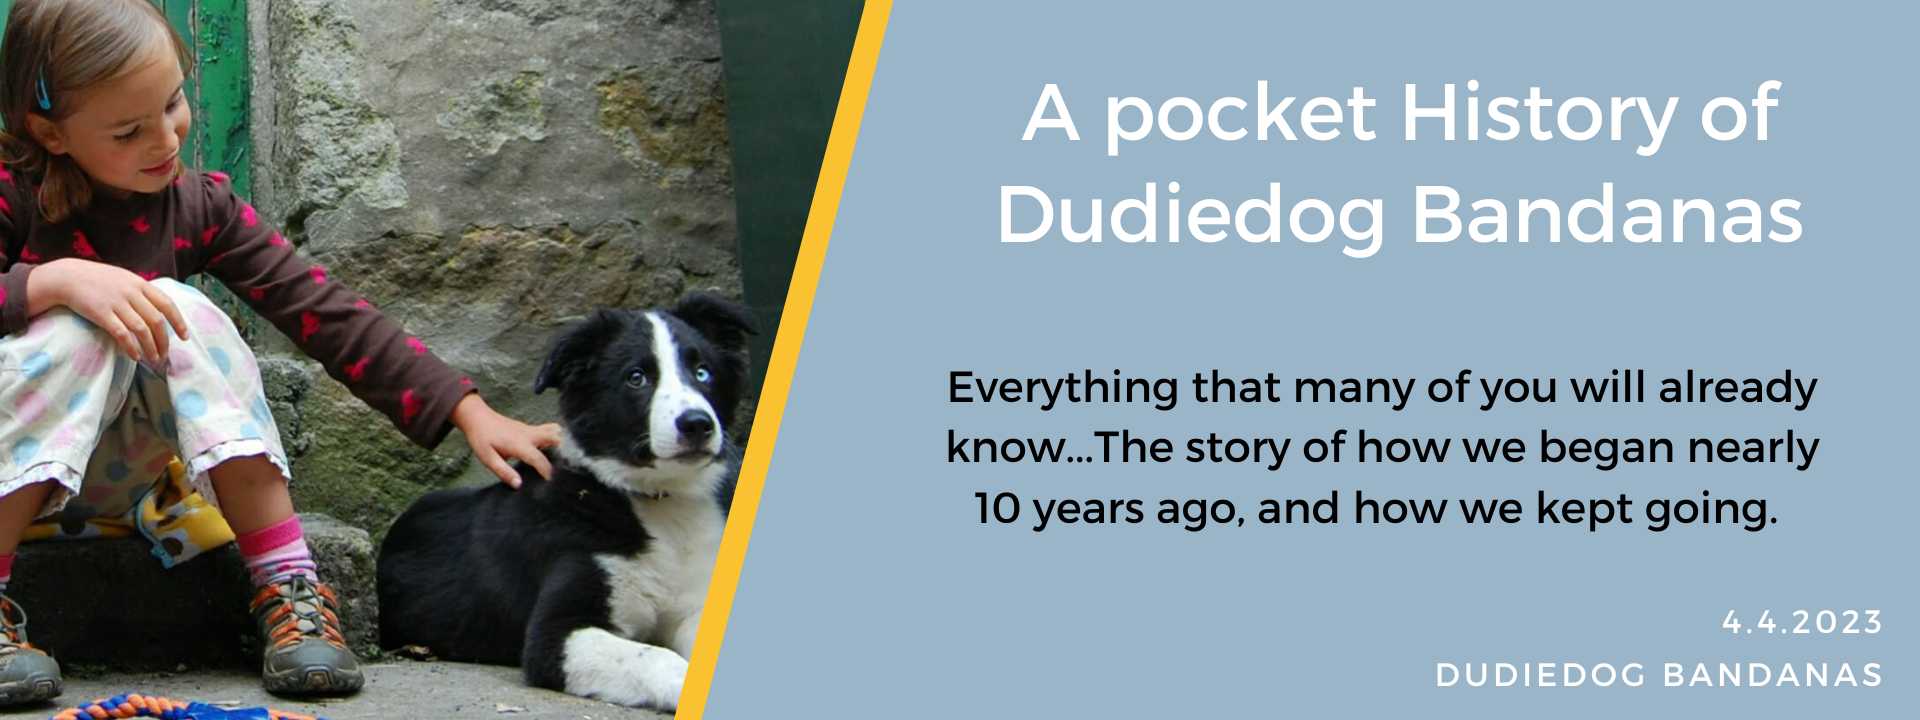 Dudiedog Bandanas and How It All Began